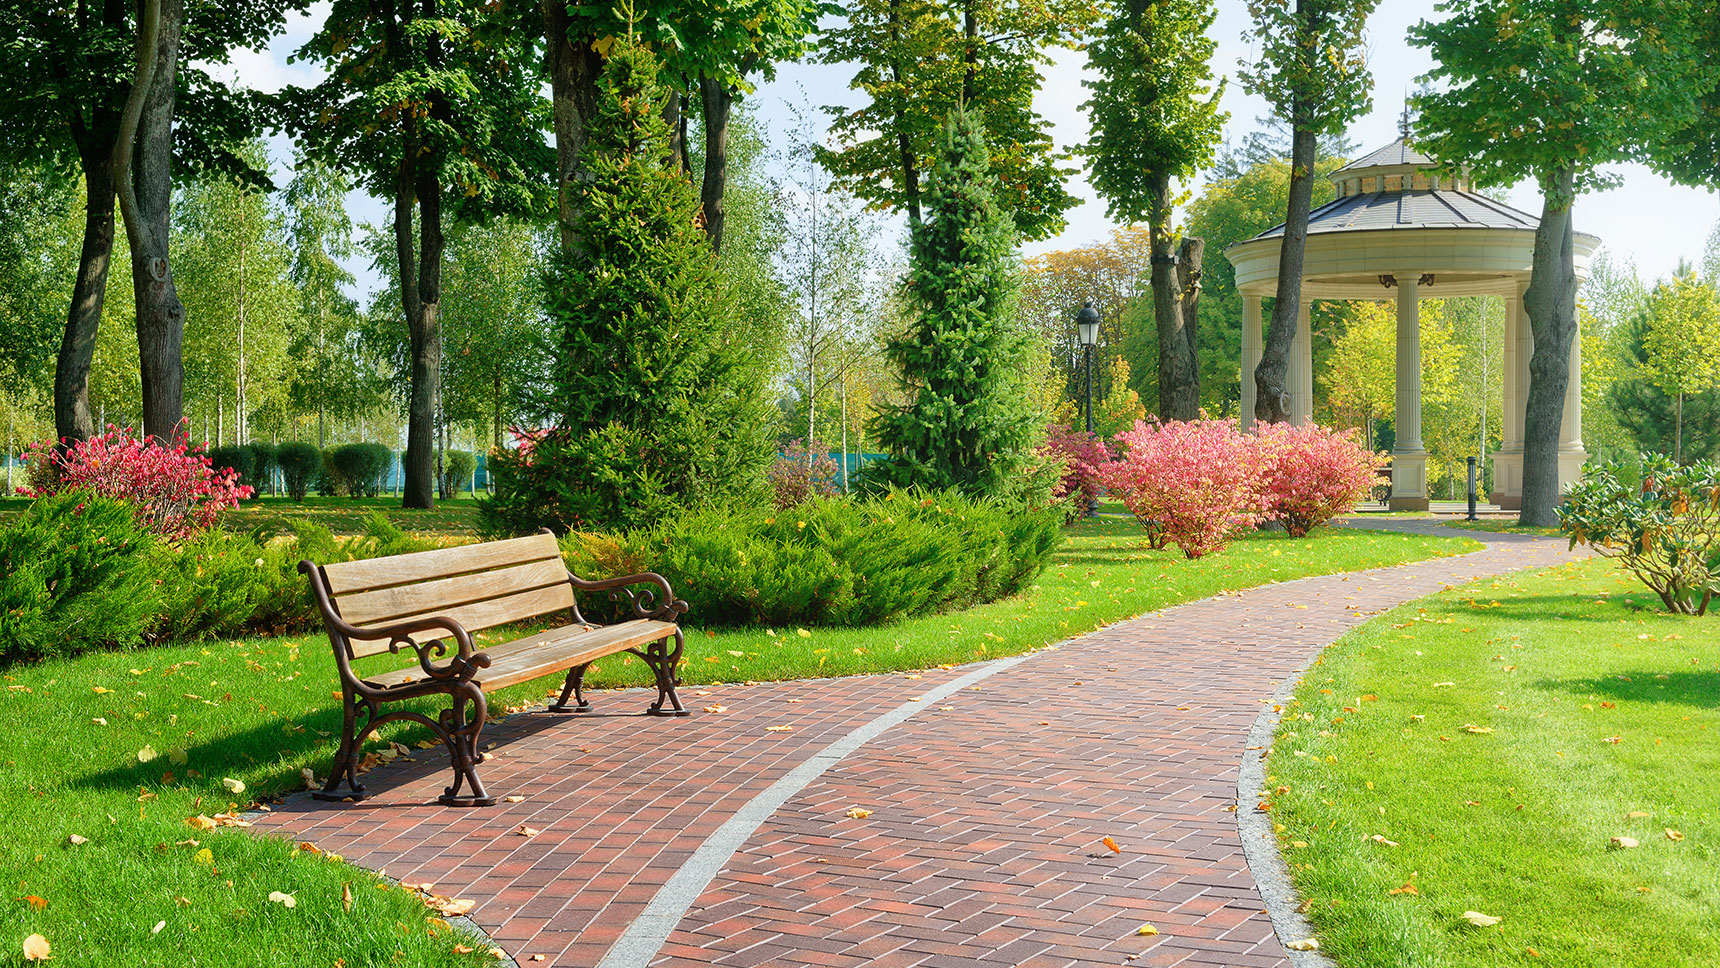 Park bench on a brick walkway with grass and trees and bushes